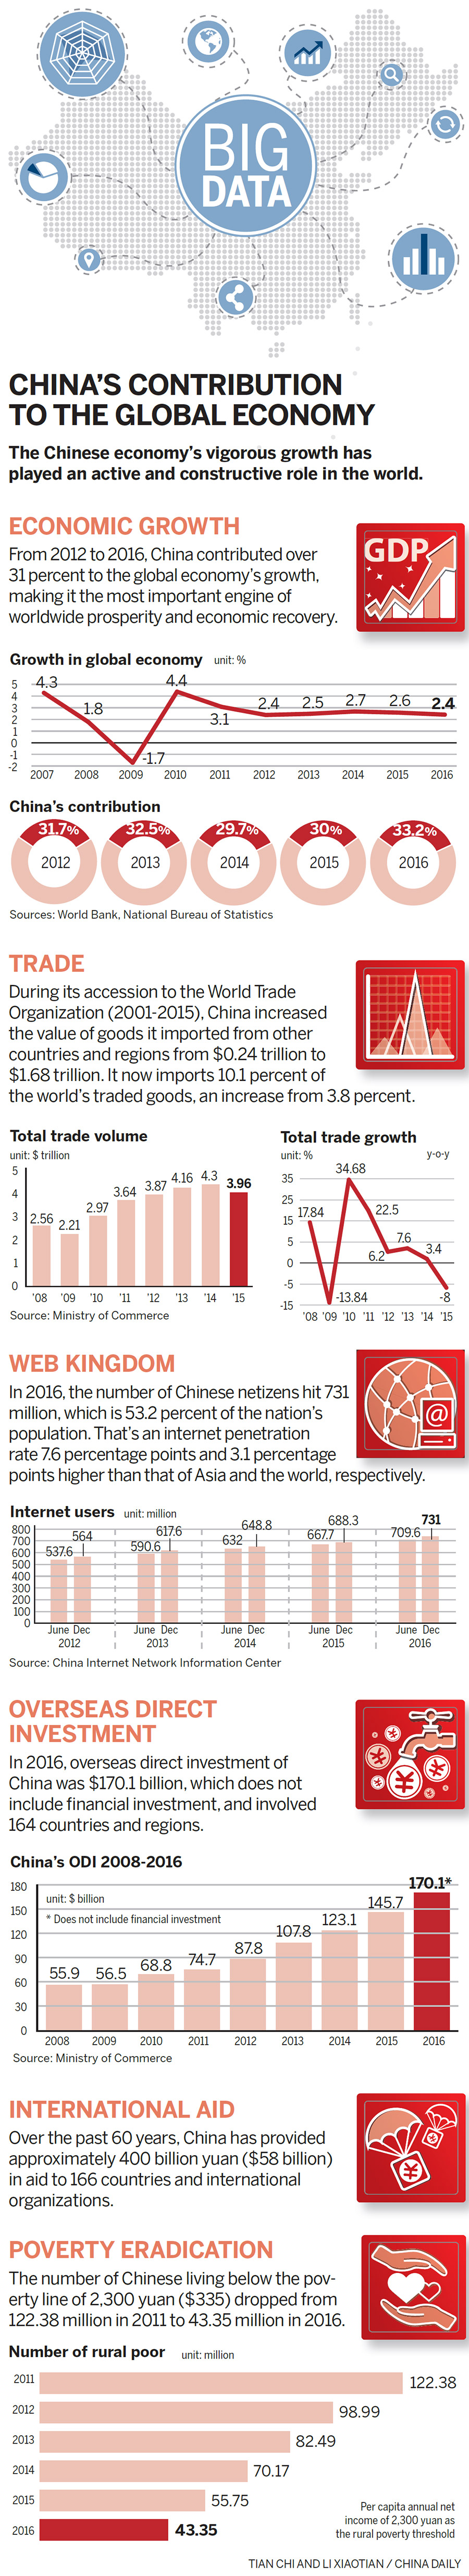 Infographic: China's contribution to the global economy